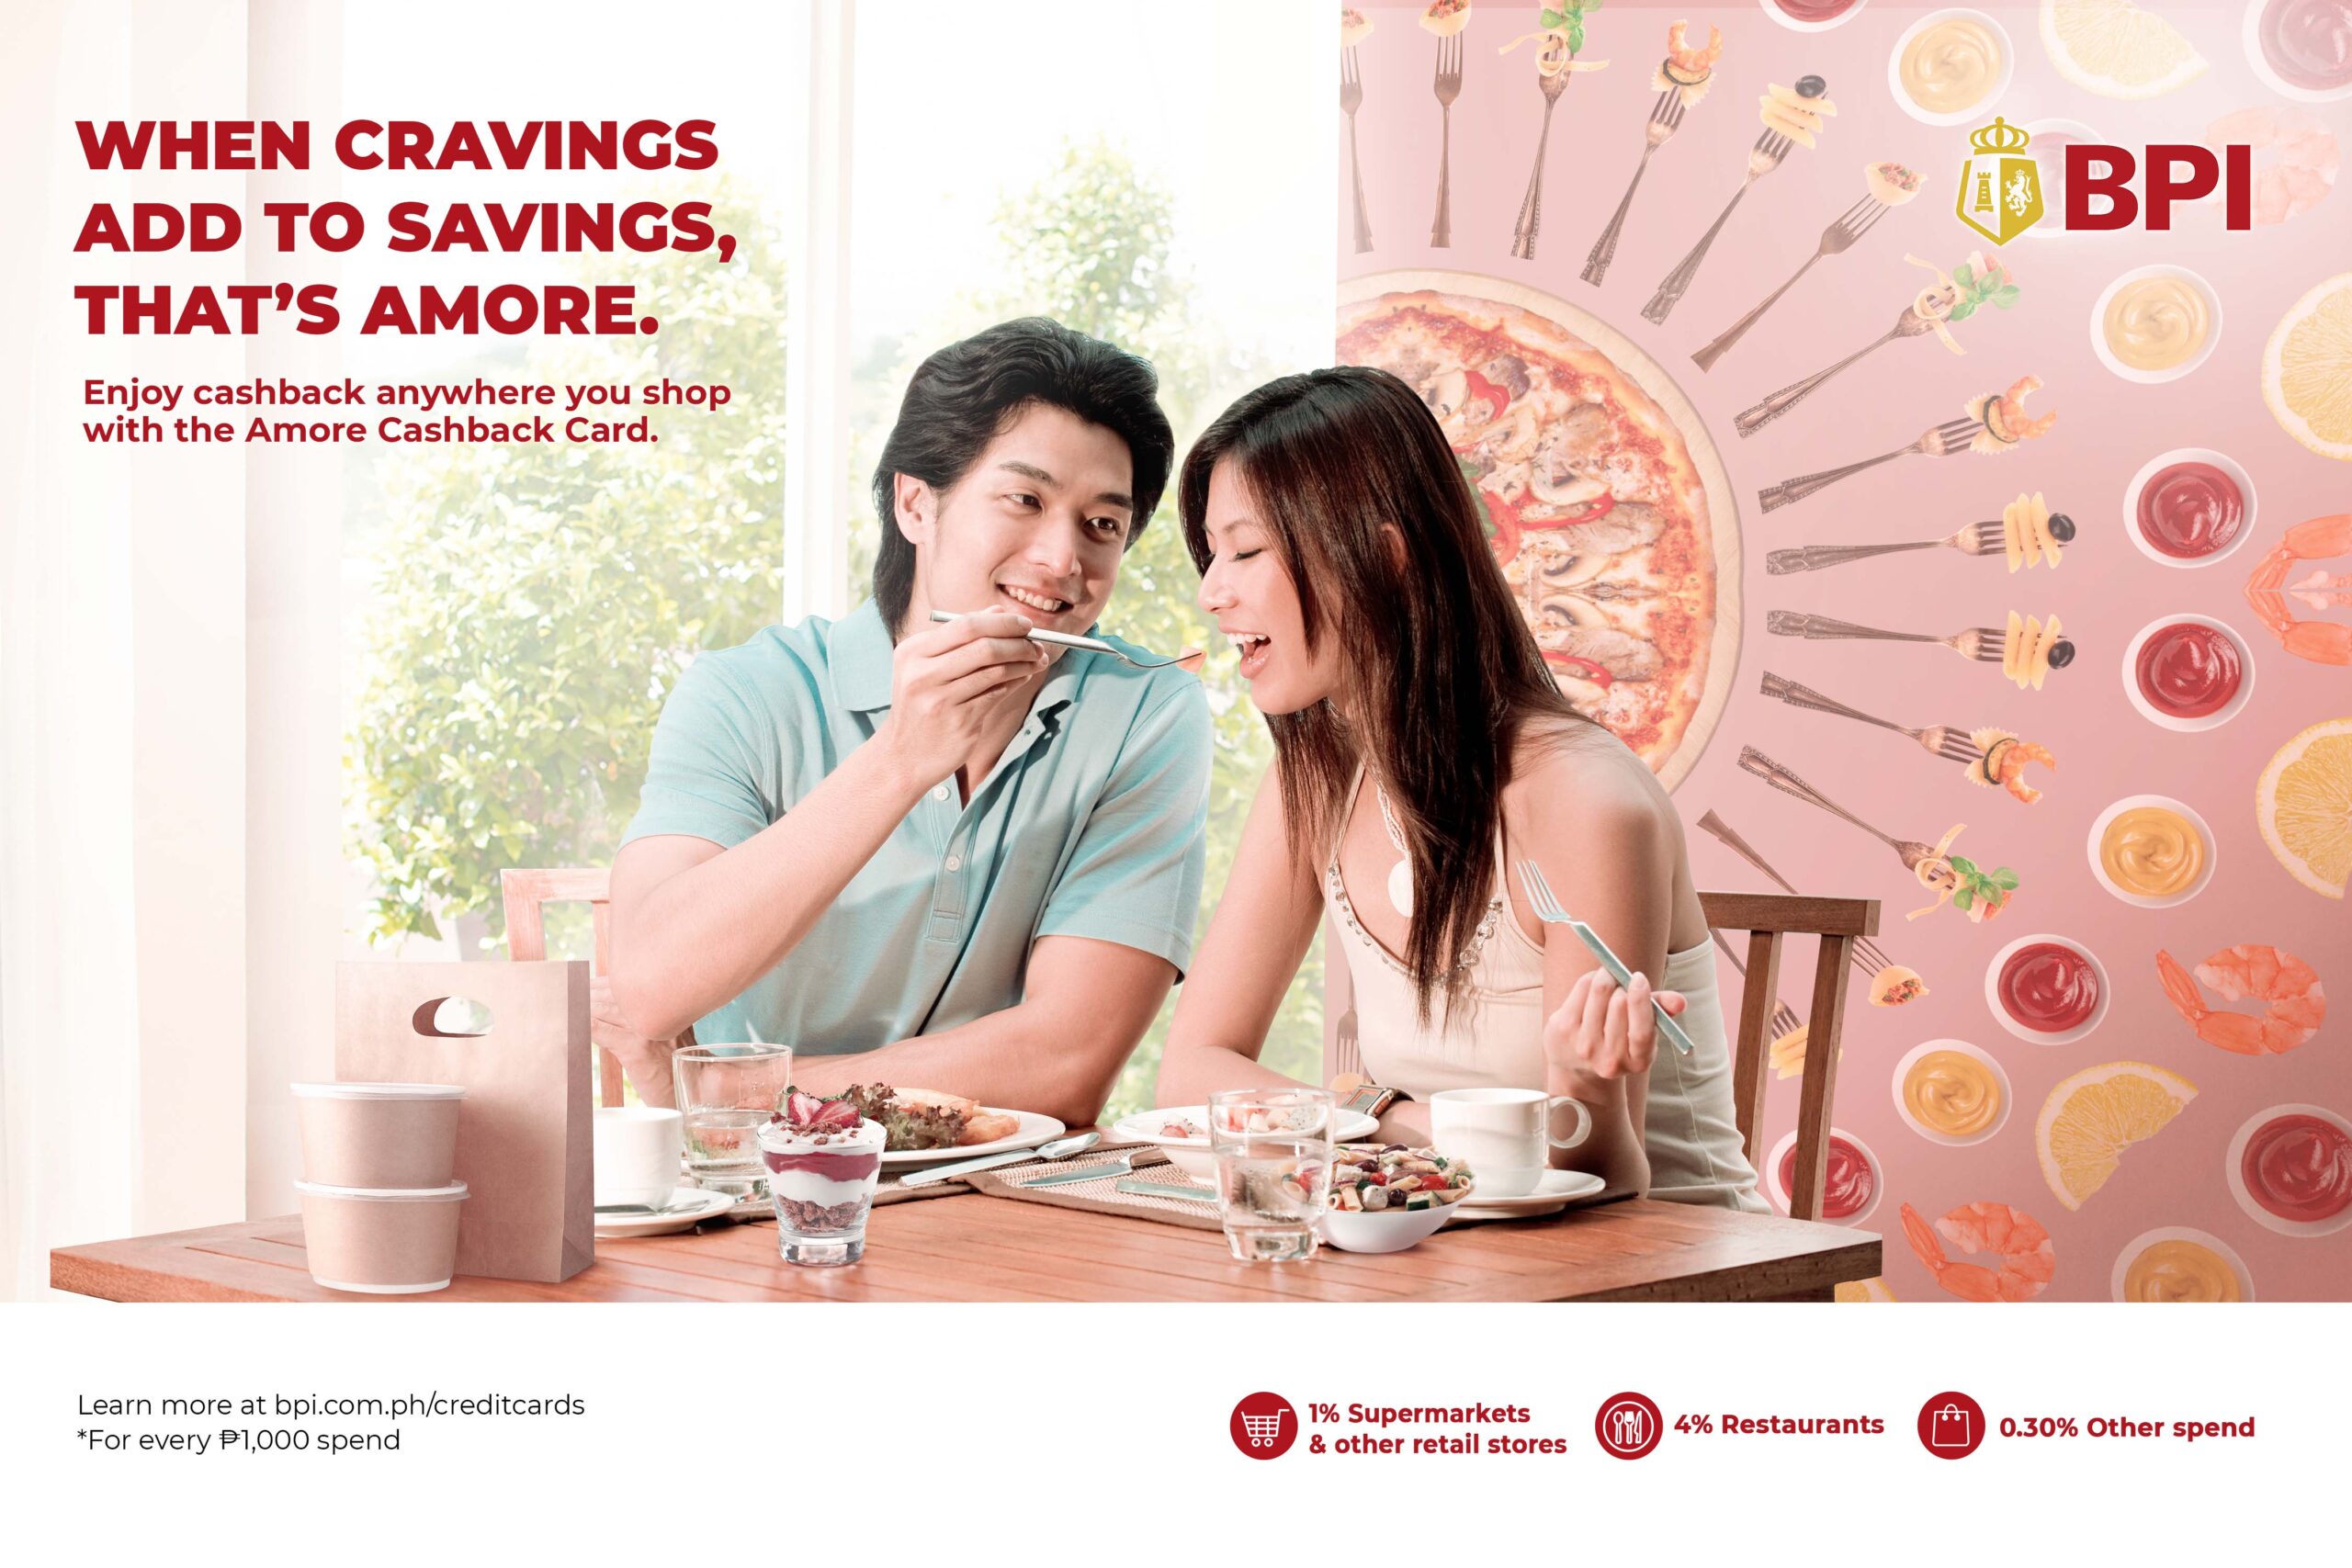 More cashback awaits with BPI Amore credit card